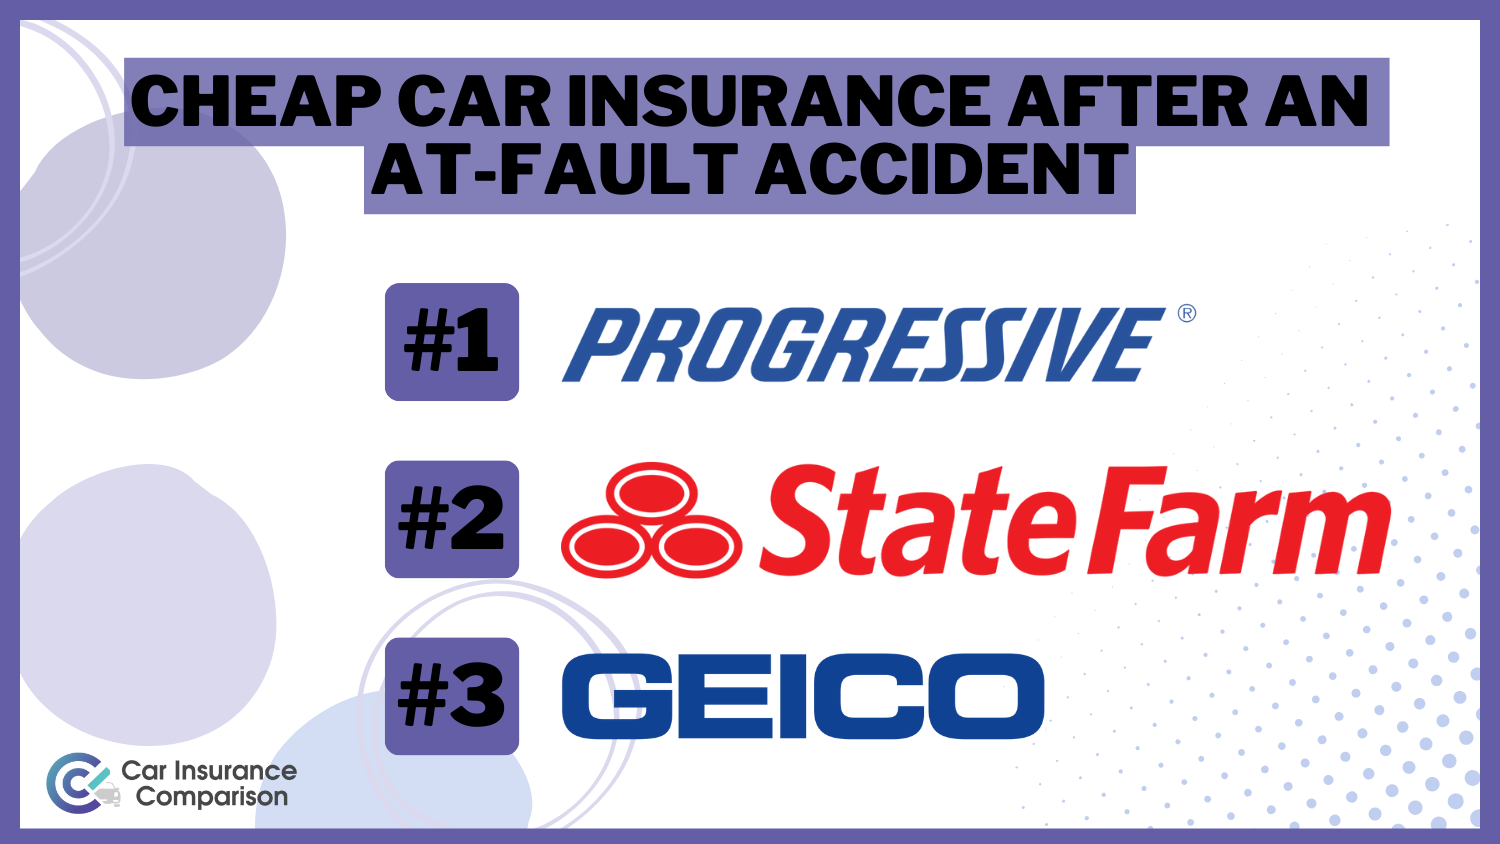 Cheap Car Insurance After An At-Fault Accident